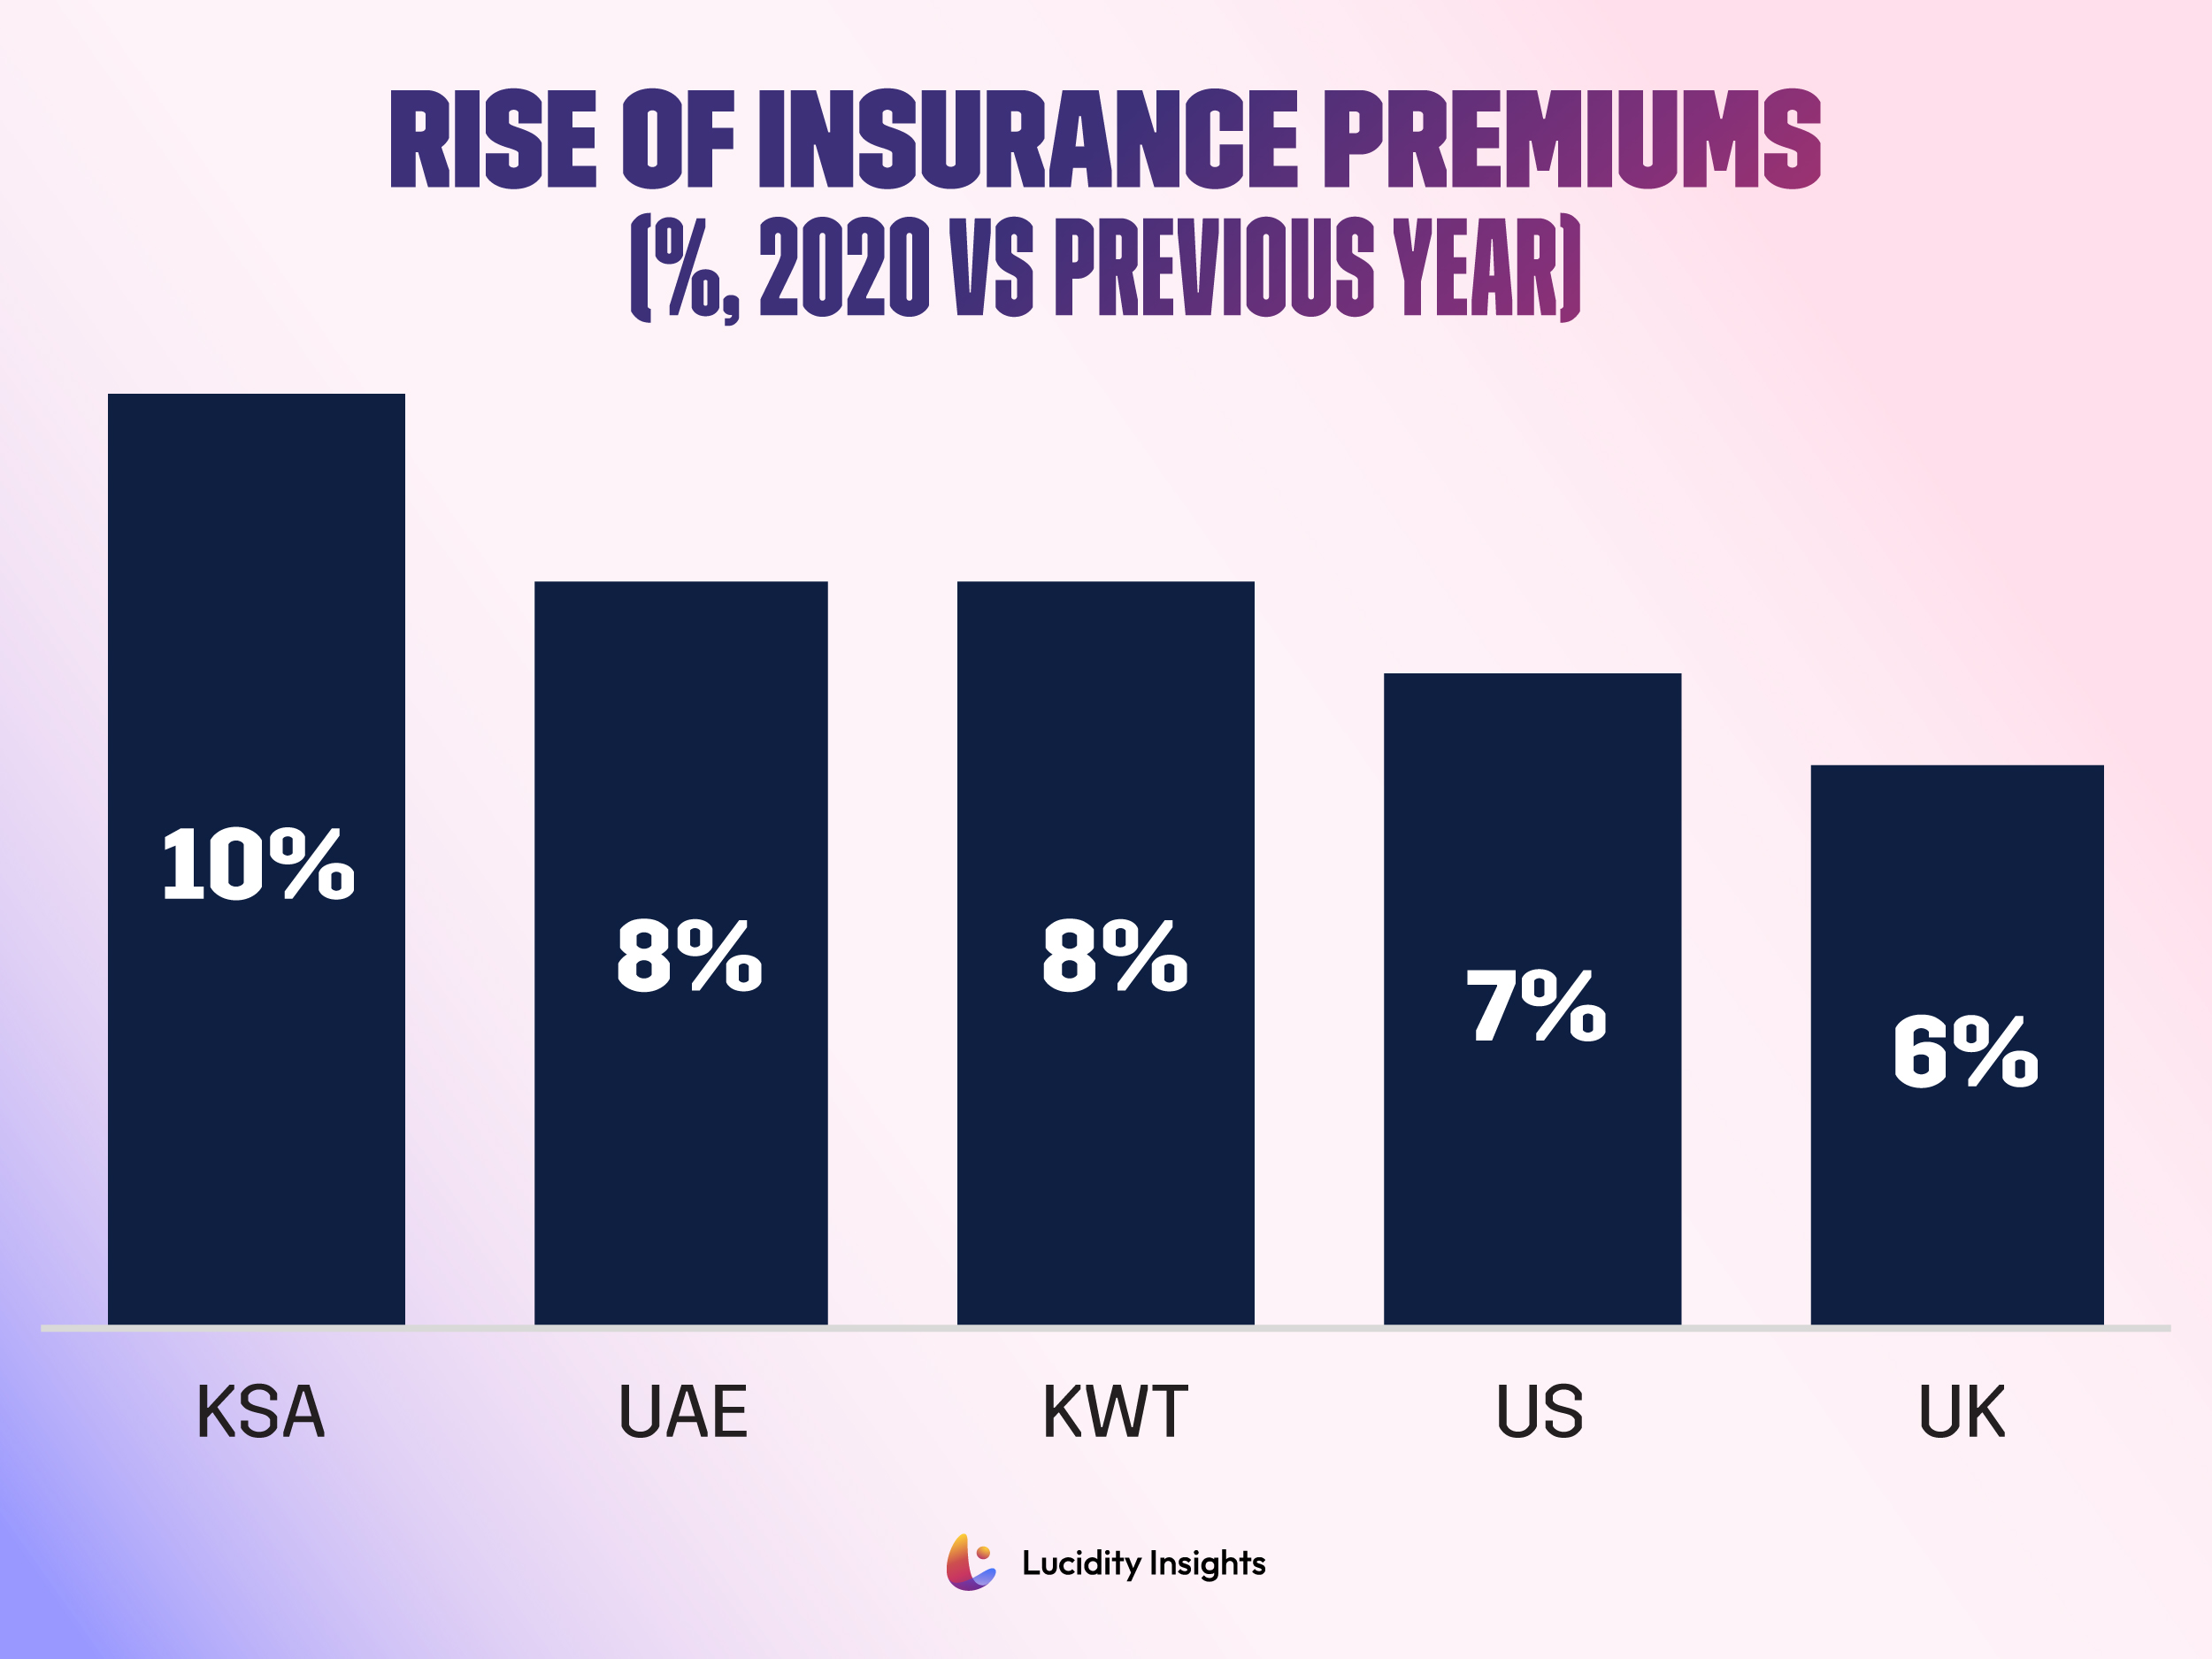 Rise of Insurance Premiums (%, 2020 vs Previous Year)